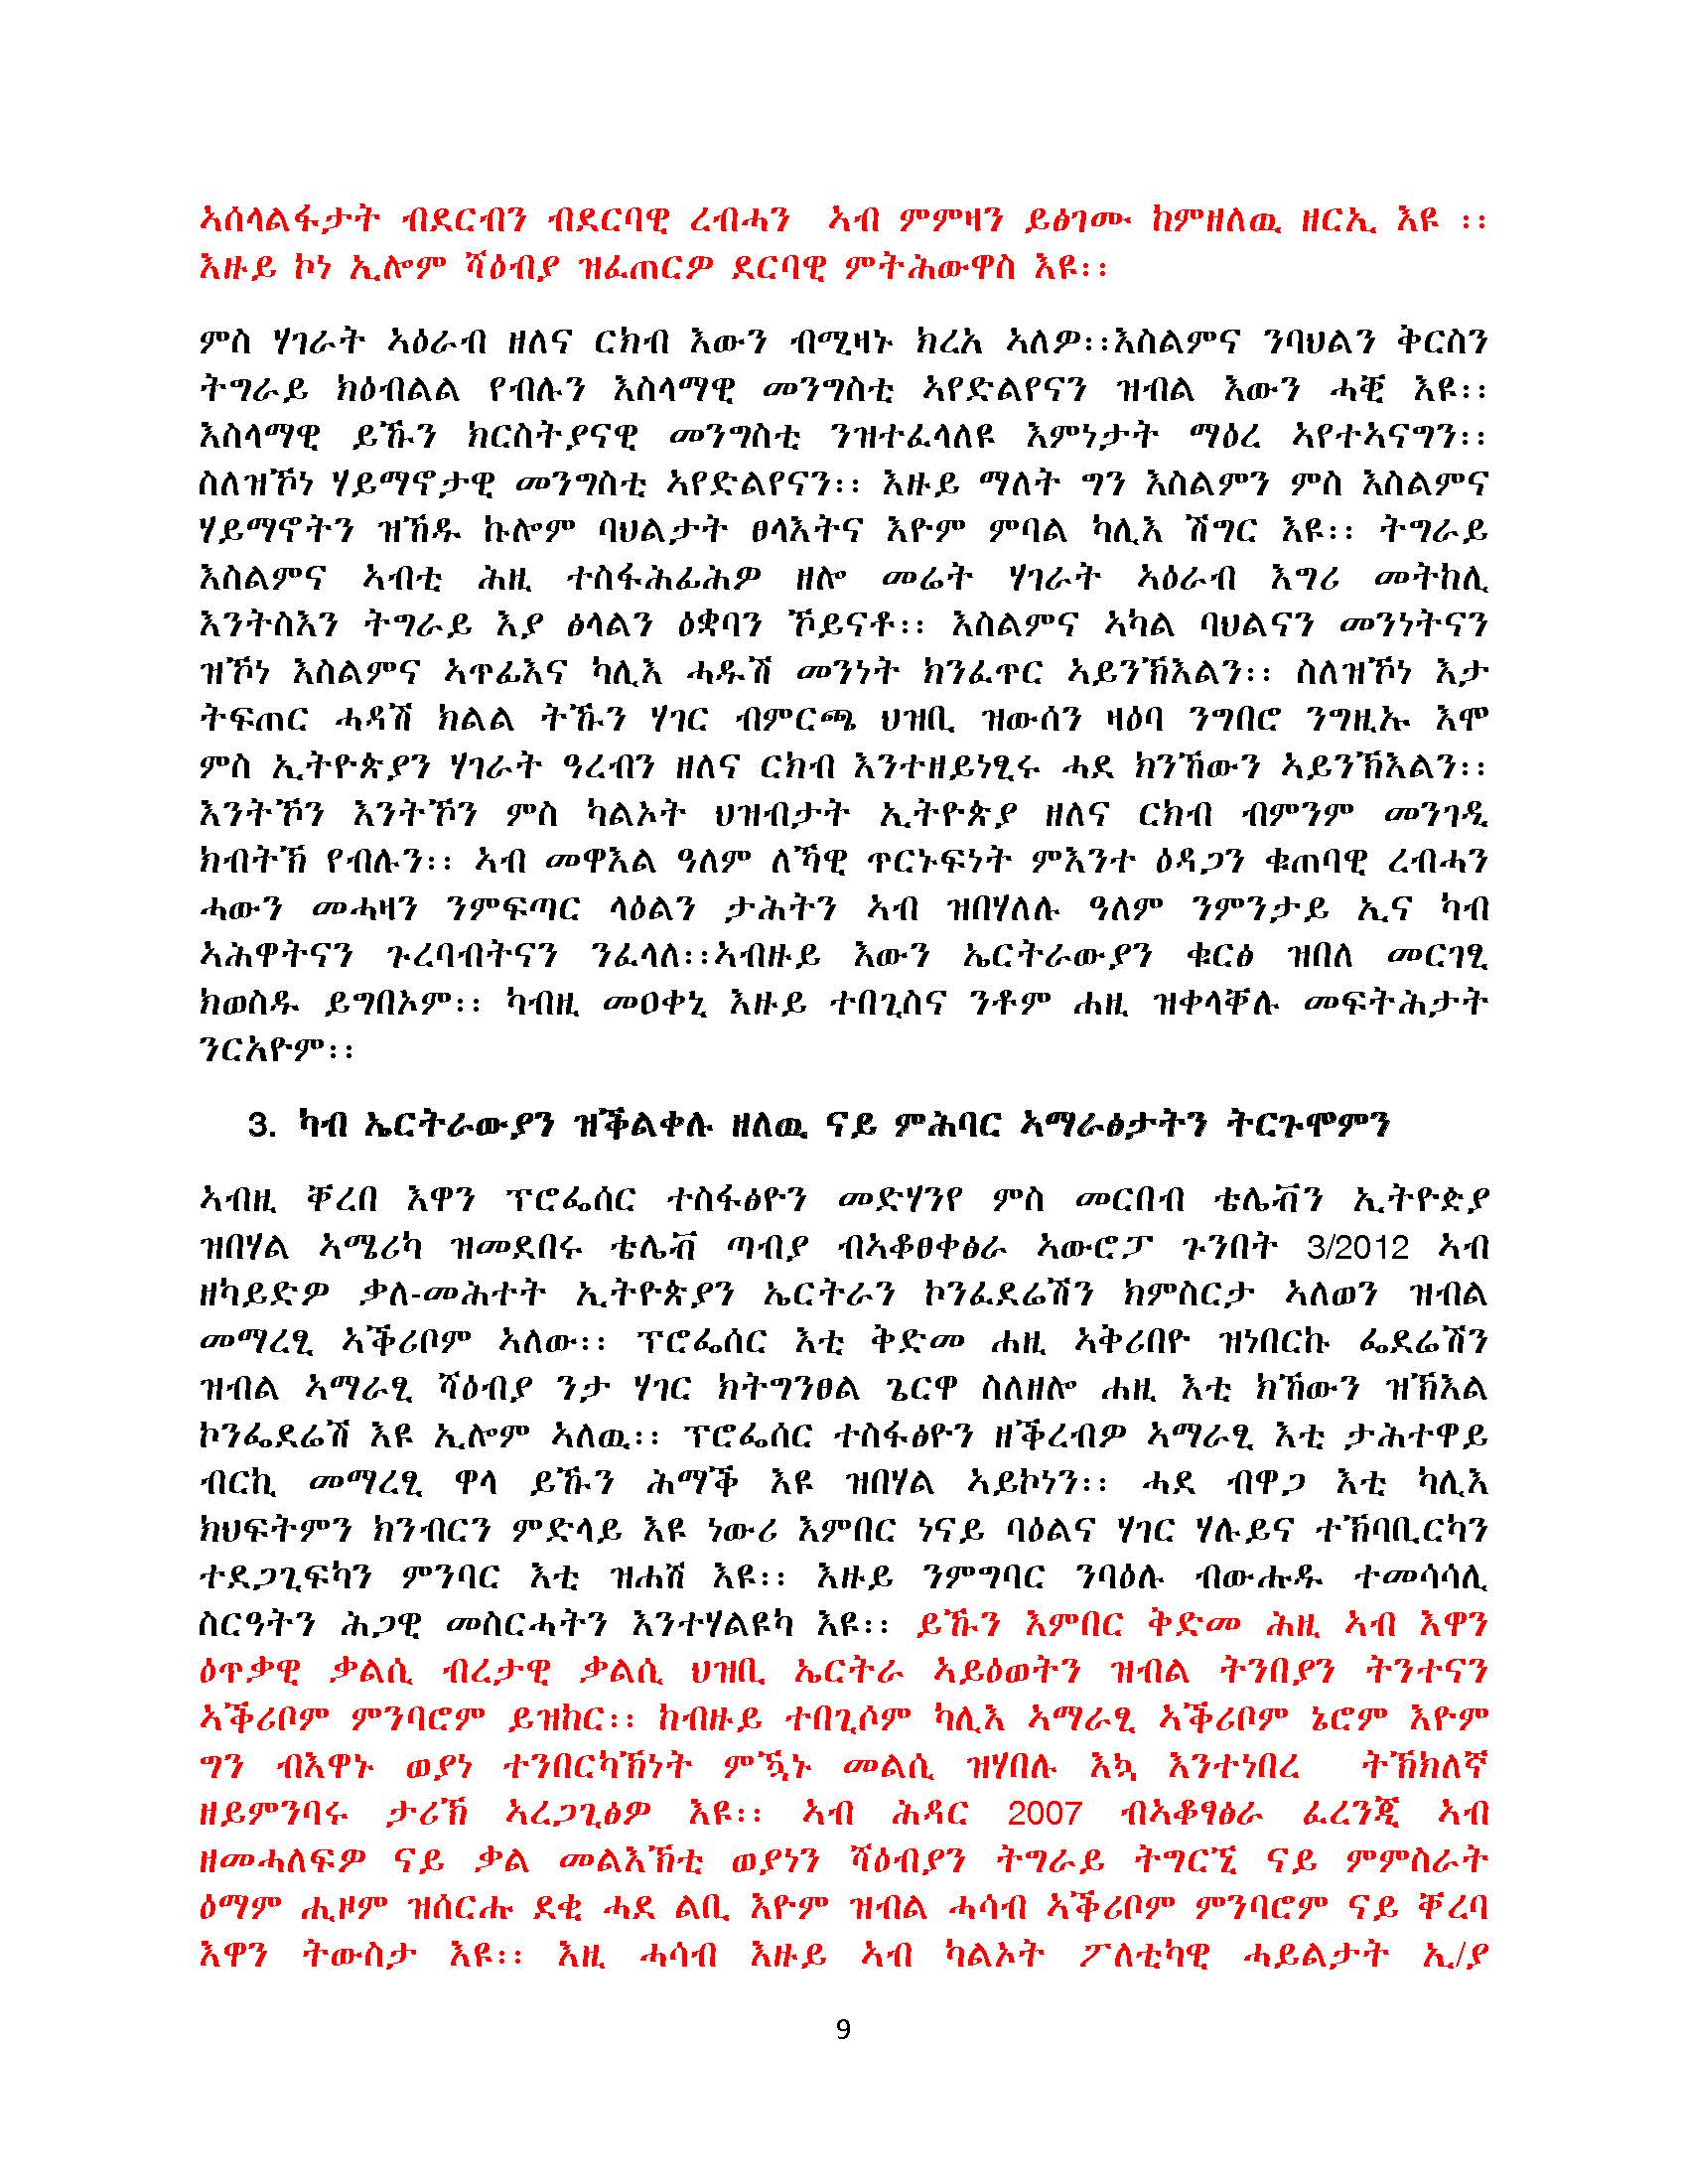 one-step-forward-for-tigreans-and-eritreans_page_09